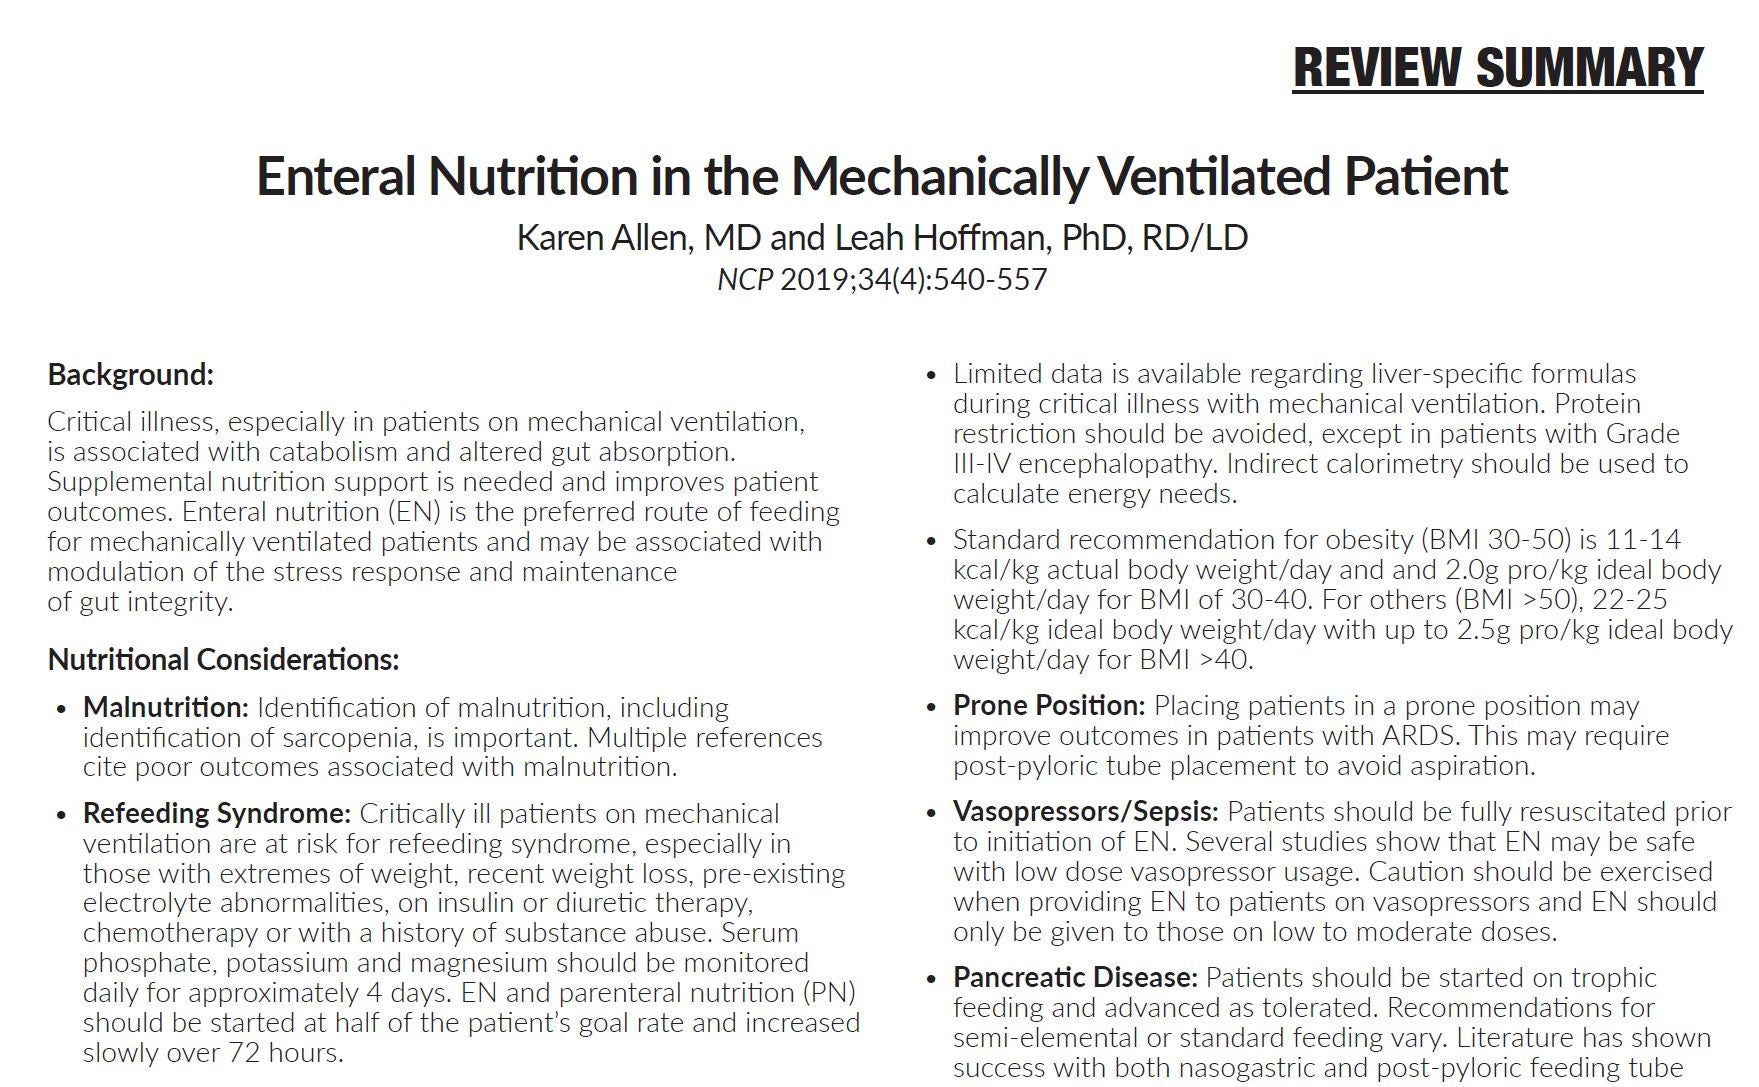 Enteral Nutrition in the Mechanically Ventilated Patient (Study Summary)